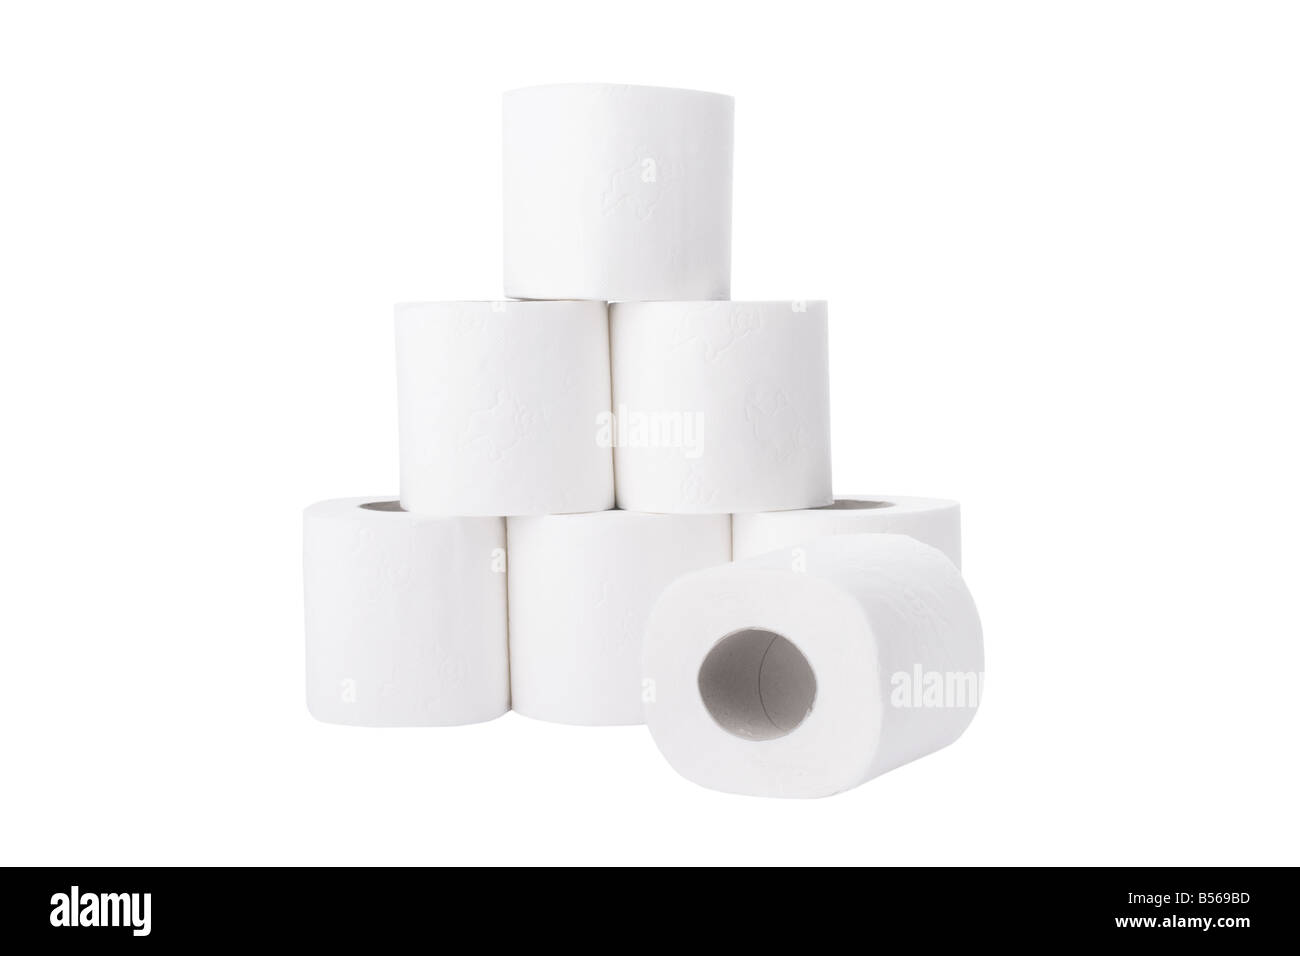 Pile of toilet paper rolls isolated on white background Stock Photo - Alamy